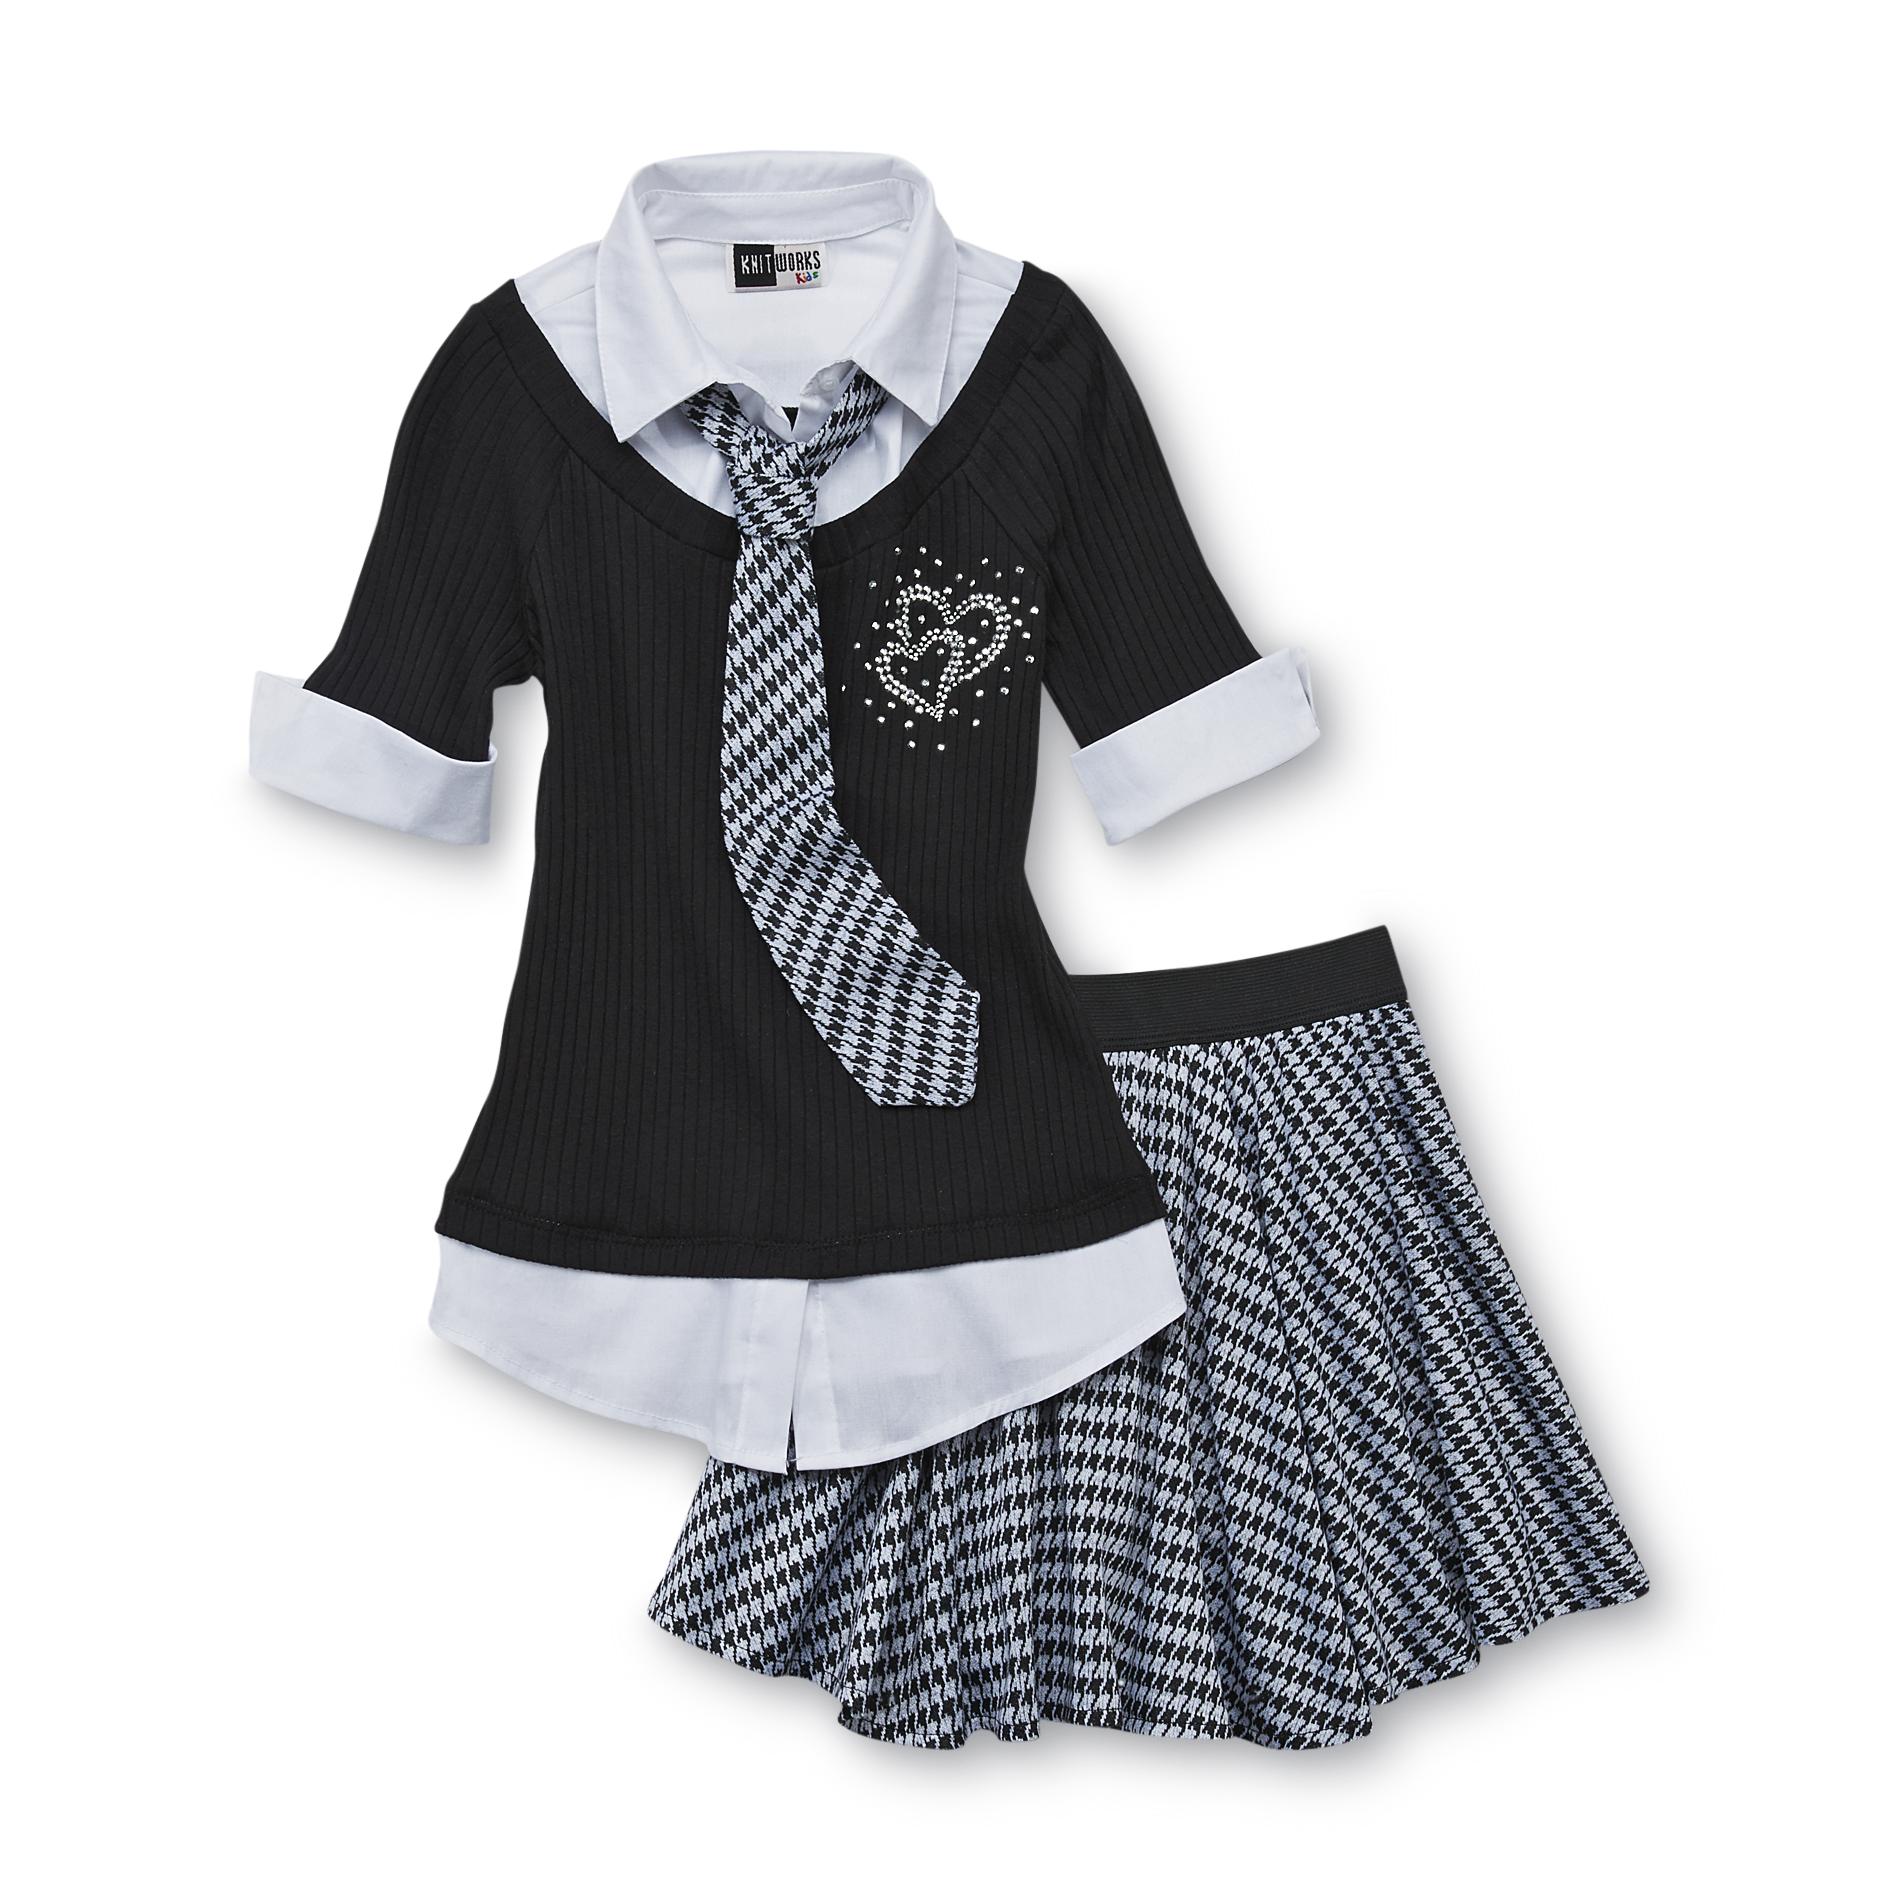 Knitworks Kids Girl's Layered-Look Top  Necktie & Skirt - Houndstooth Check